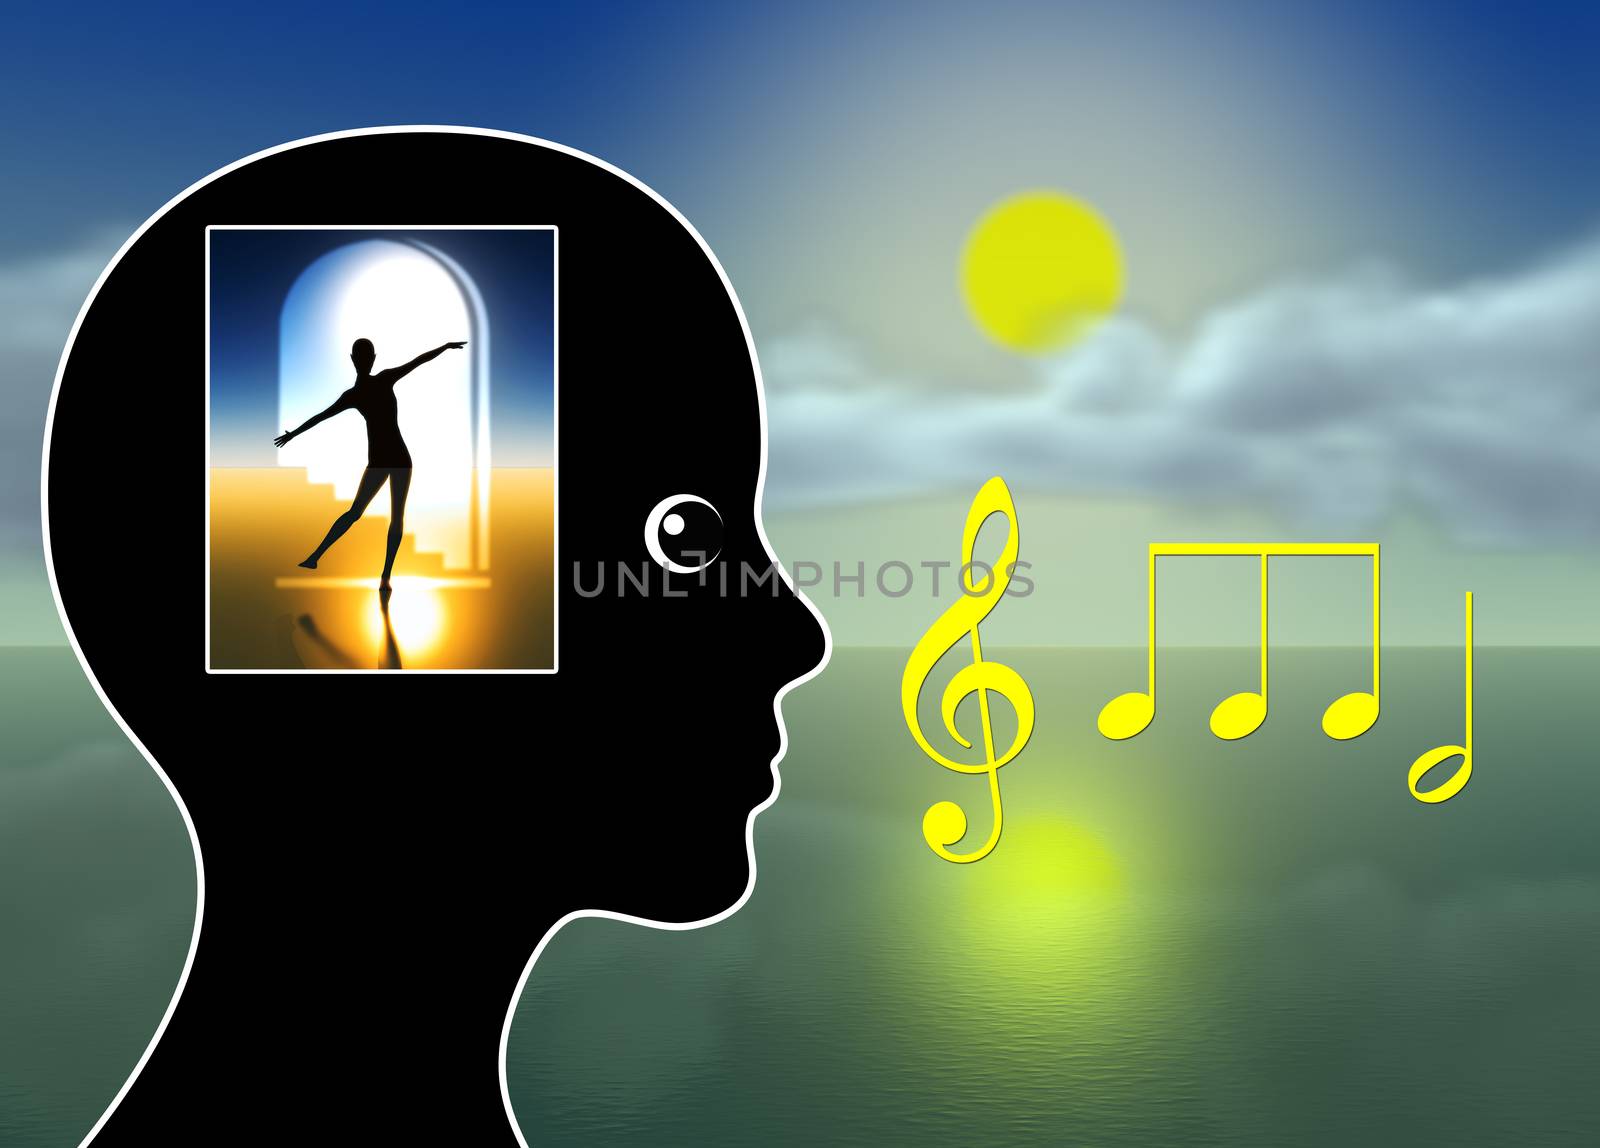 Music therapy for relaxation, meditation, stress reduction, pain management or just to tickle fantasy